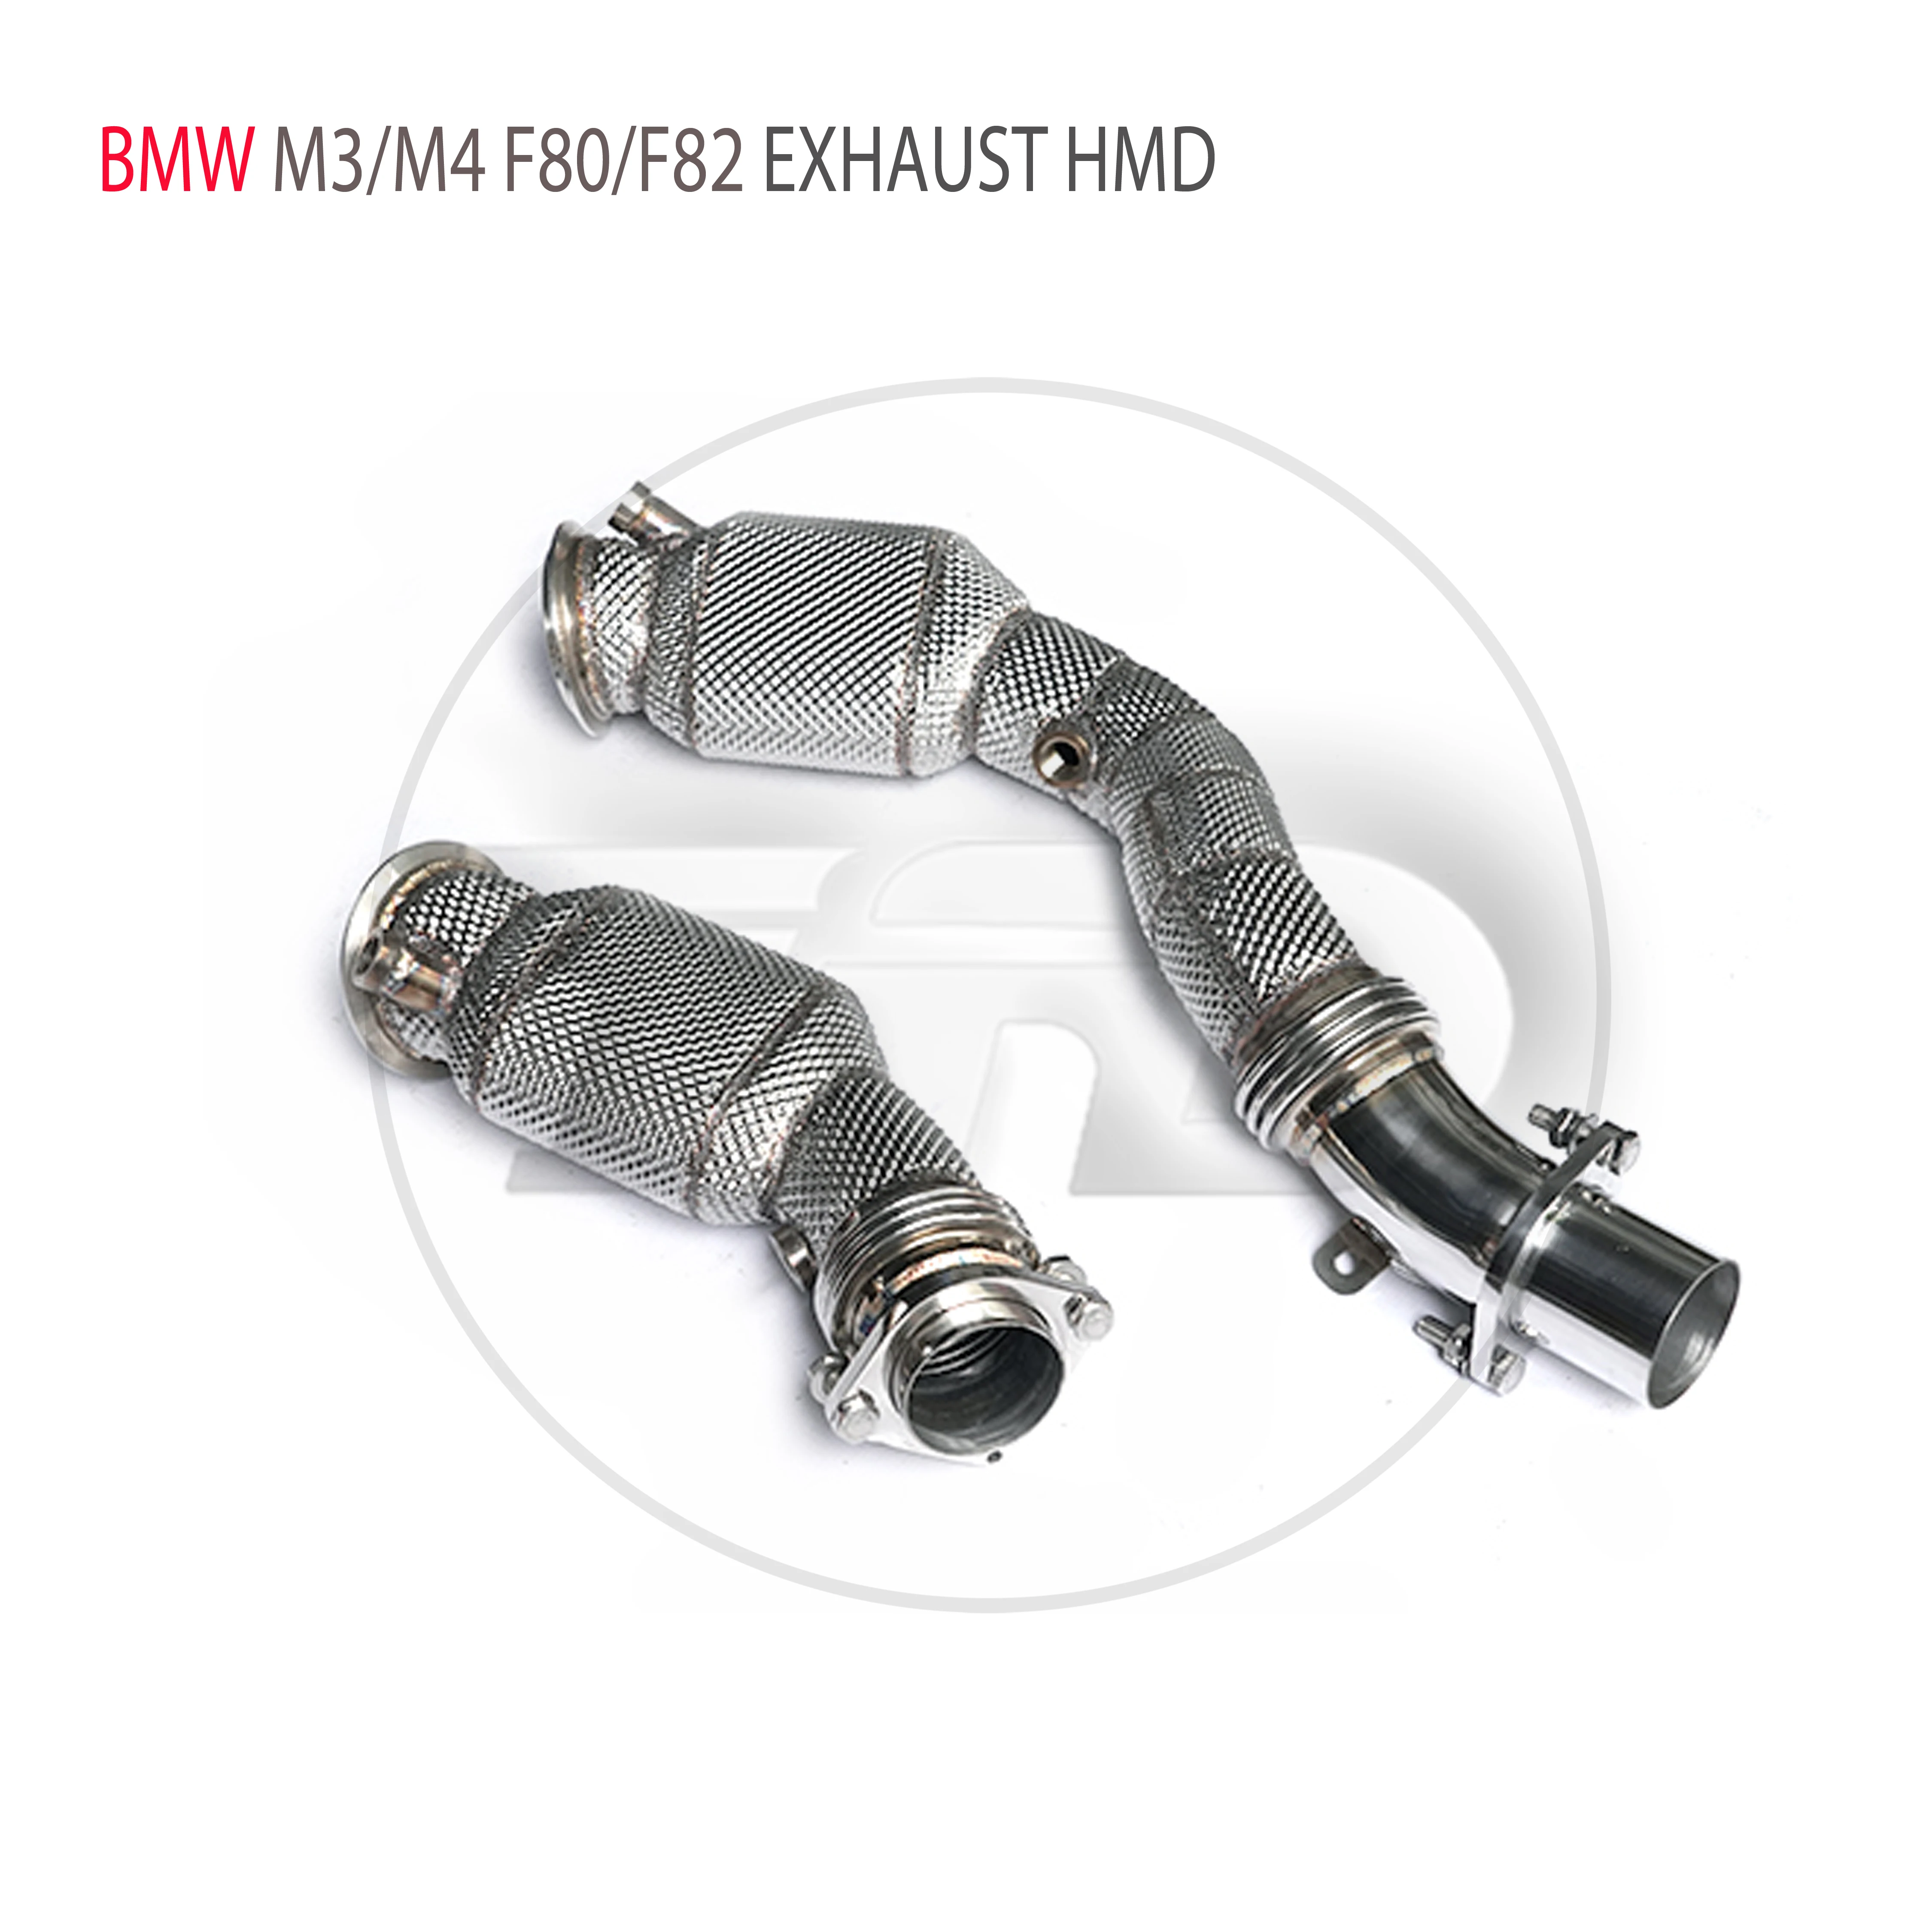 

HMD Exhaust System High Flow Performance Downpipe for BMW M3 M4 F80 F82 Car Accessories With Catalytic Converter Header